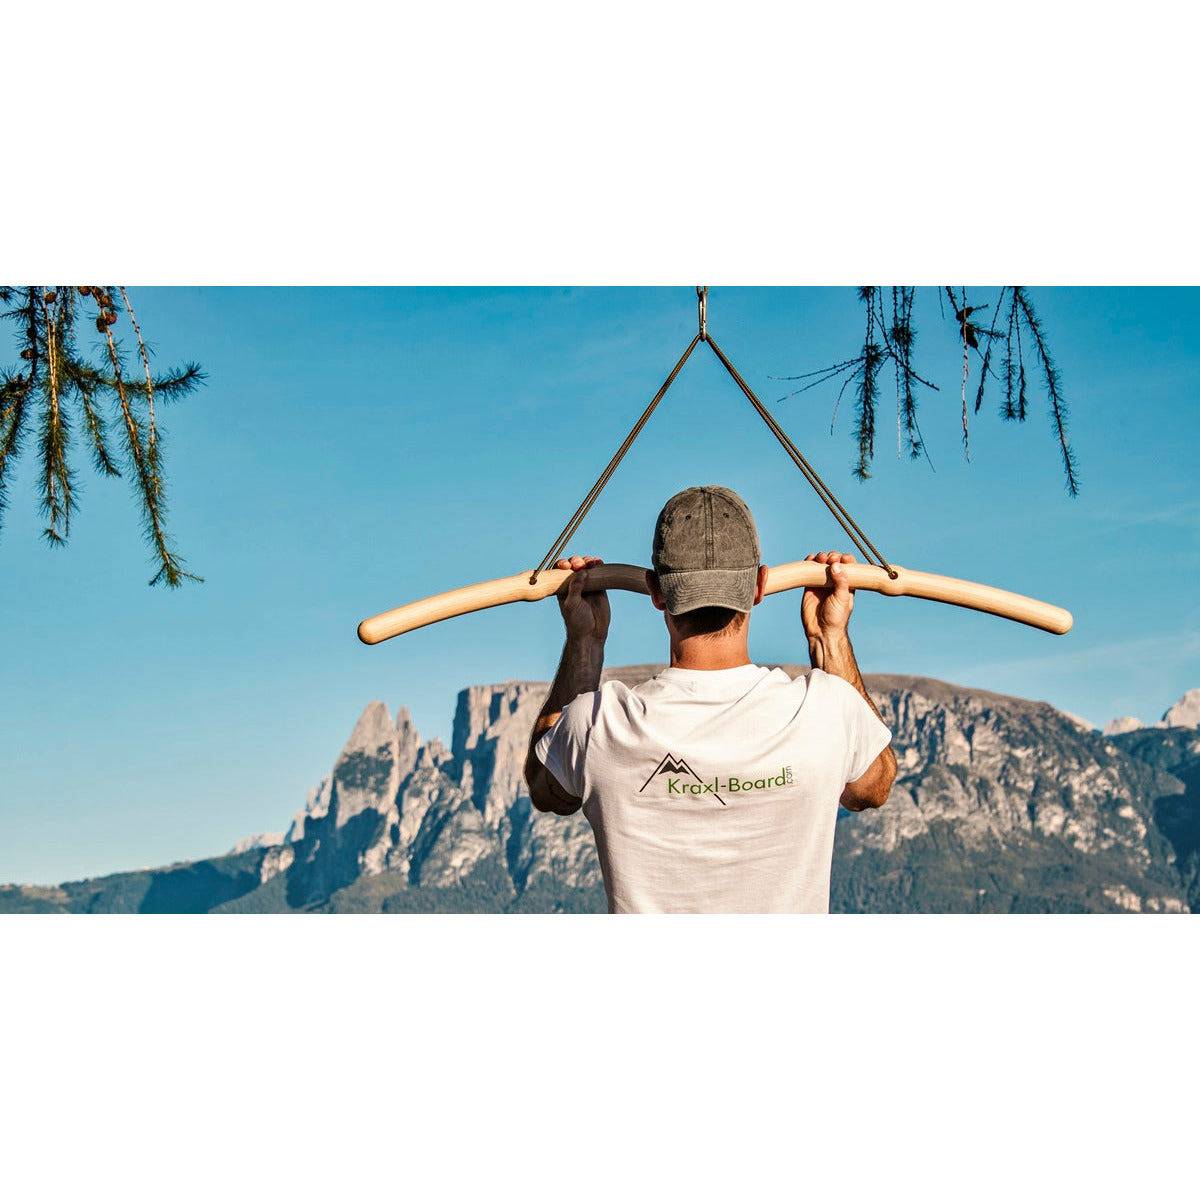 Snake Pull-Up Bar Portable - The pull-up bar for on the go